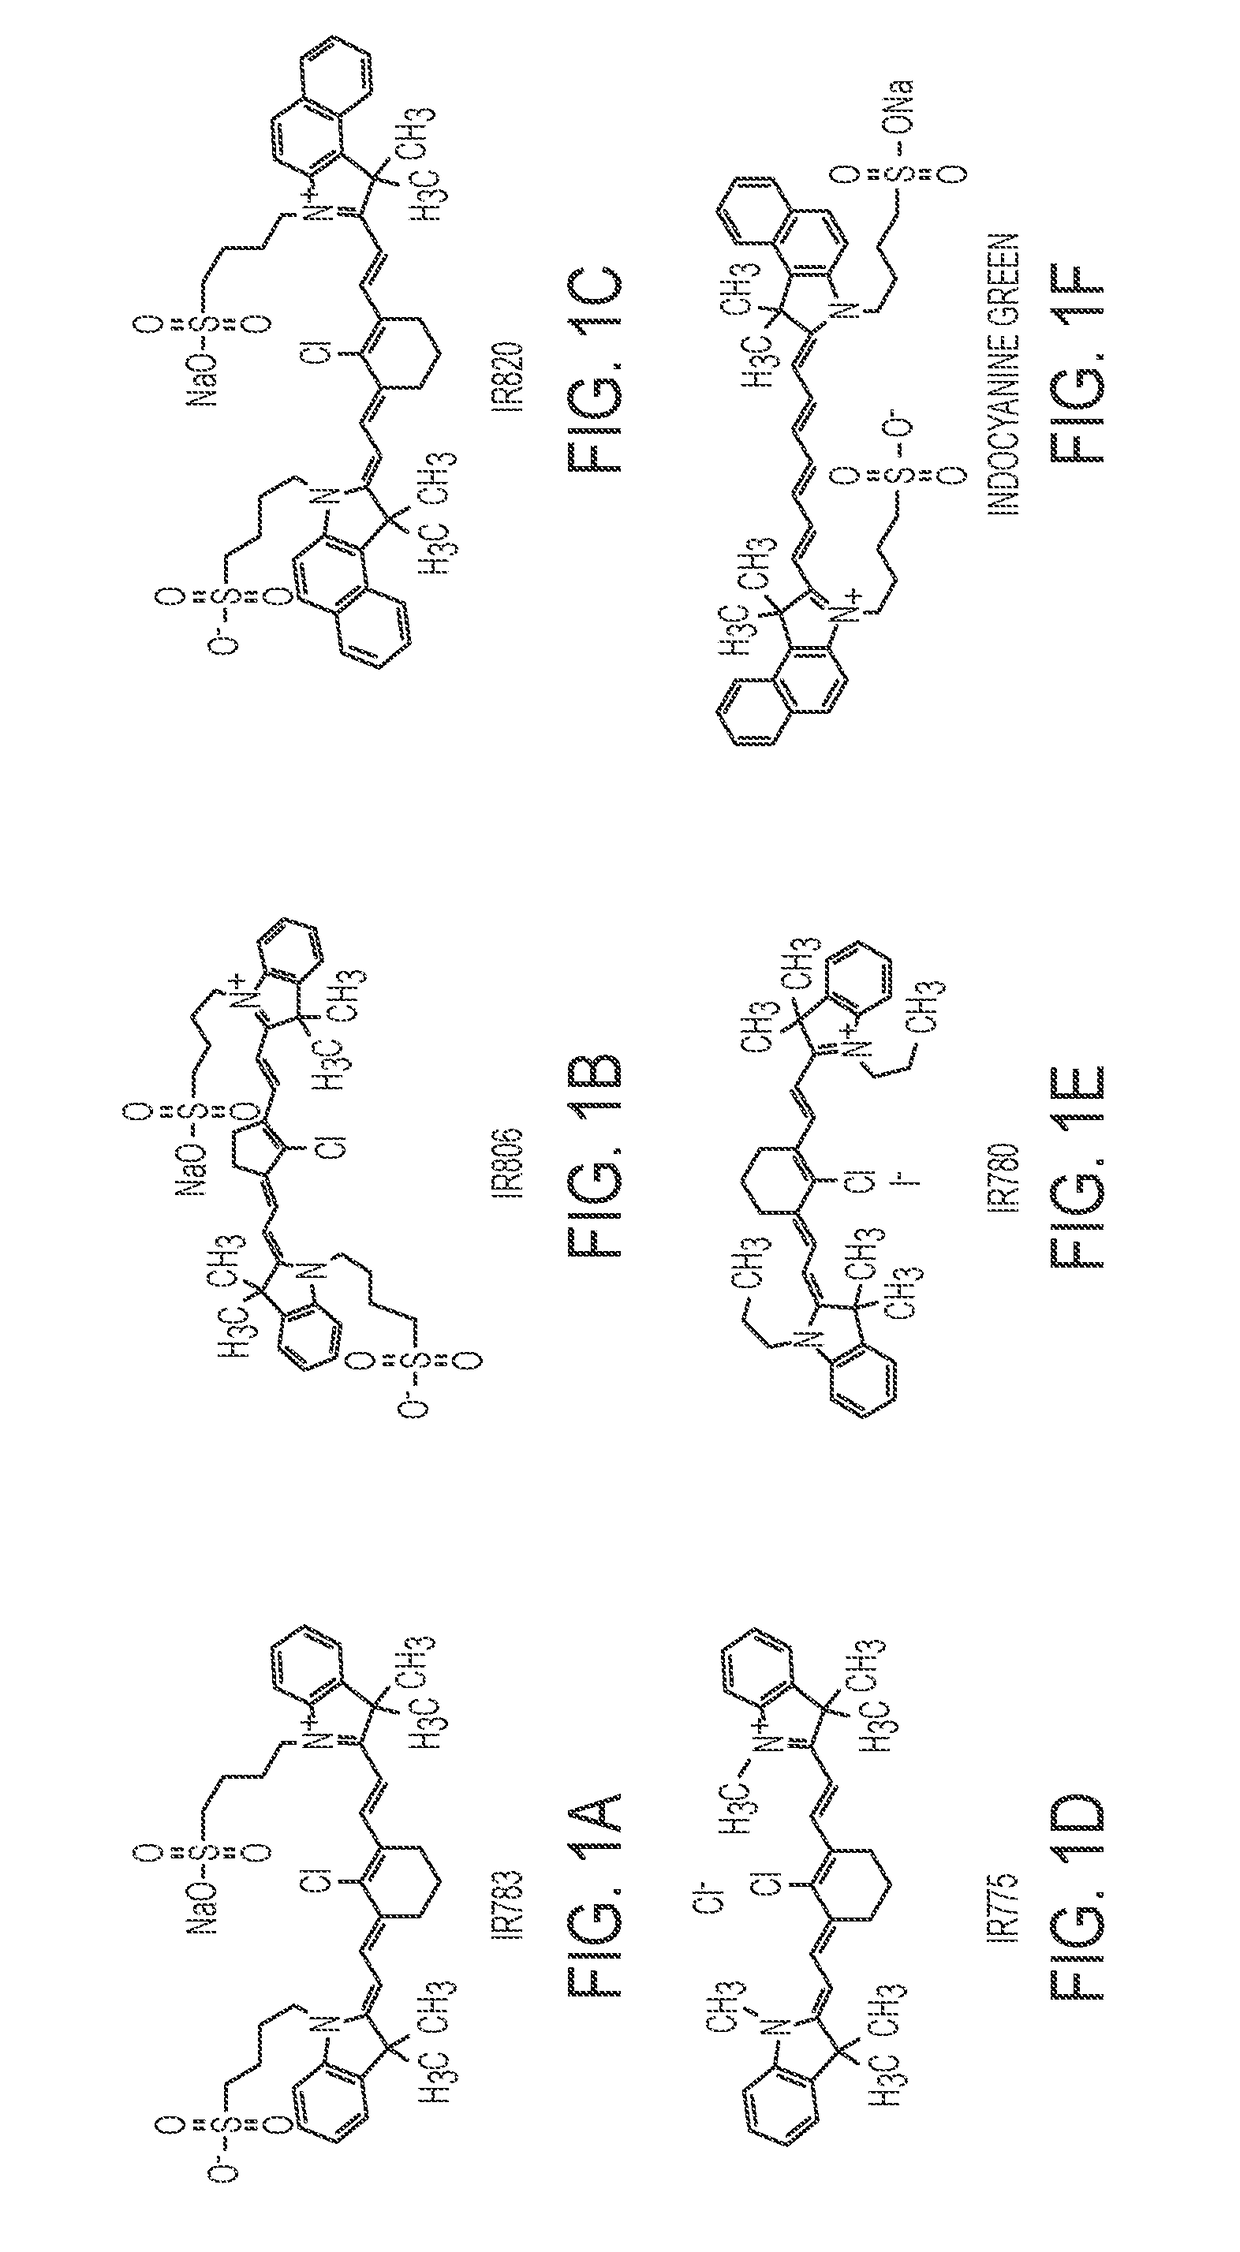 Dye-stabilized nanoparticles and methods of their manufacture and therapeutic use